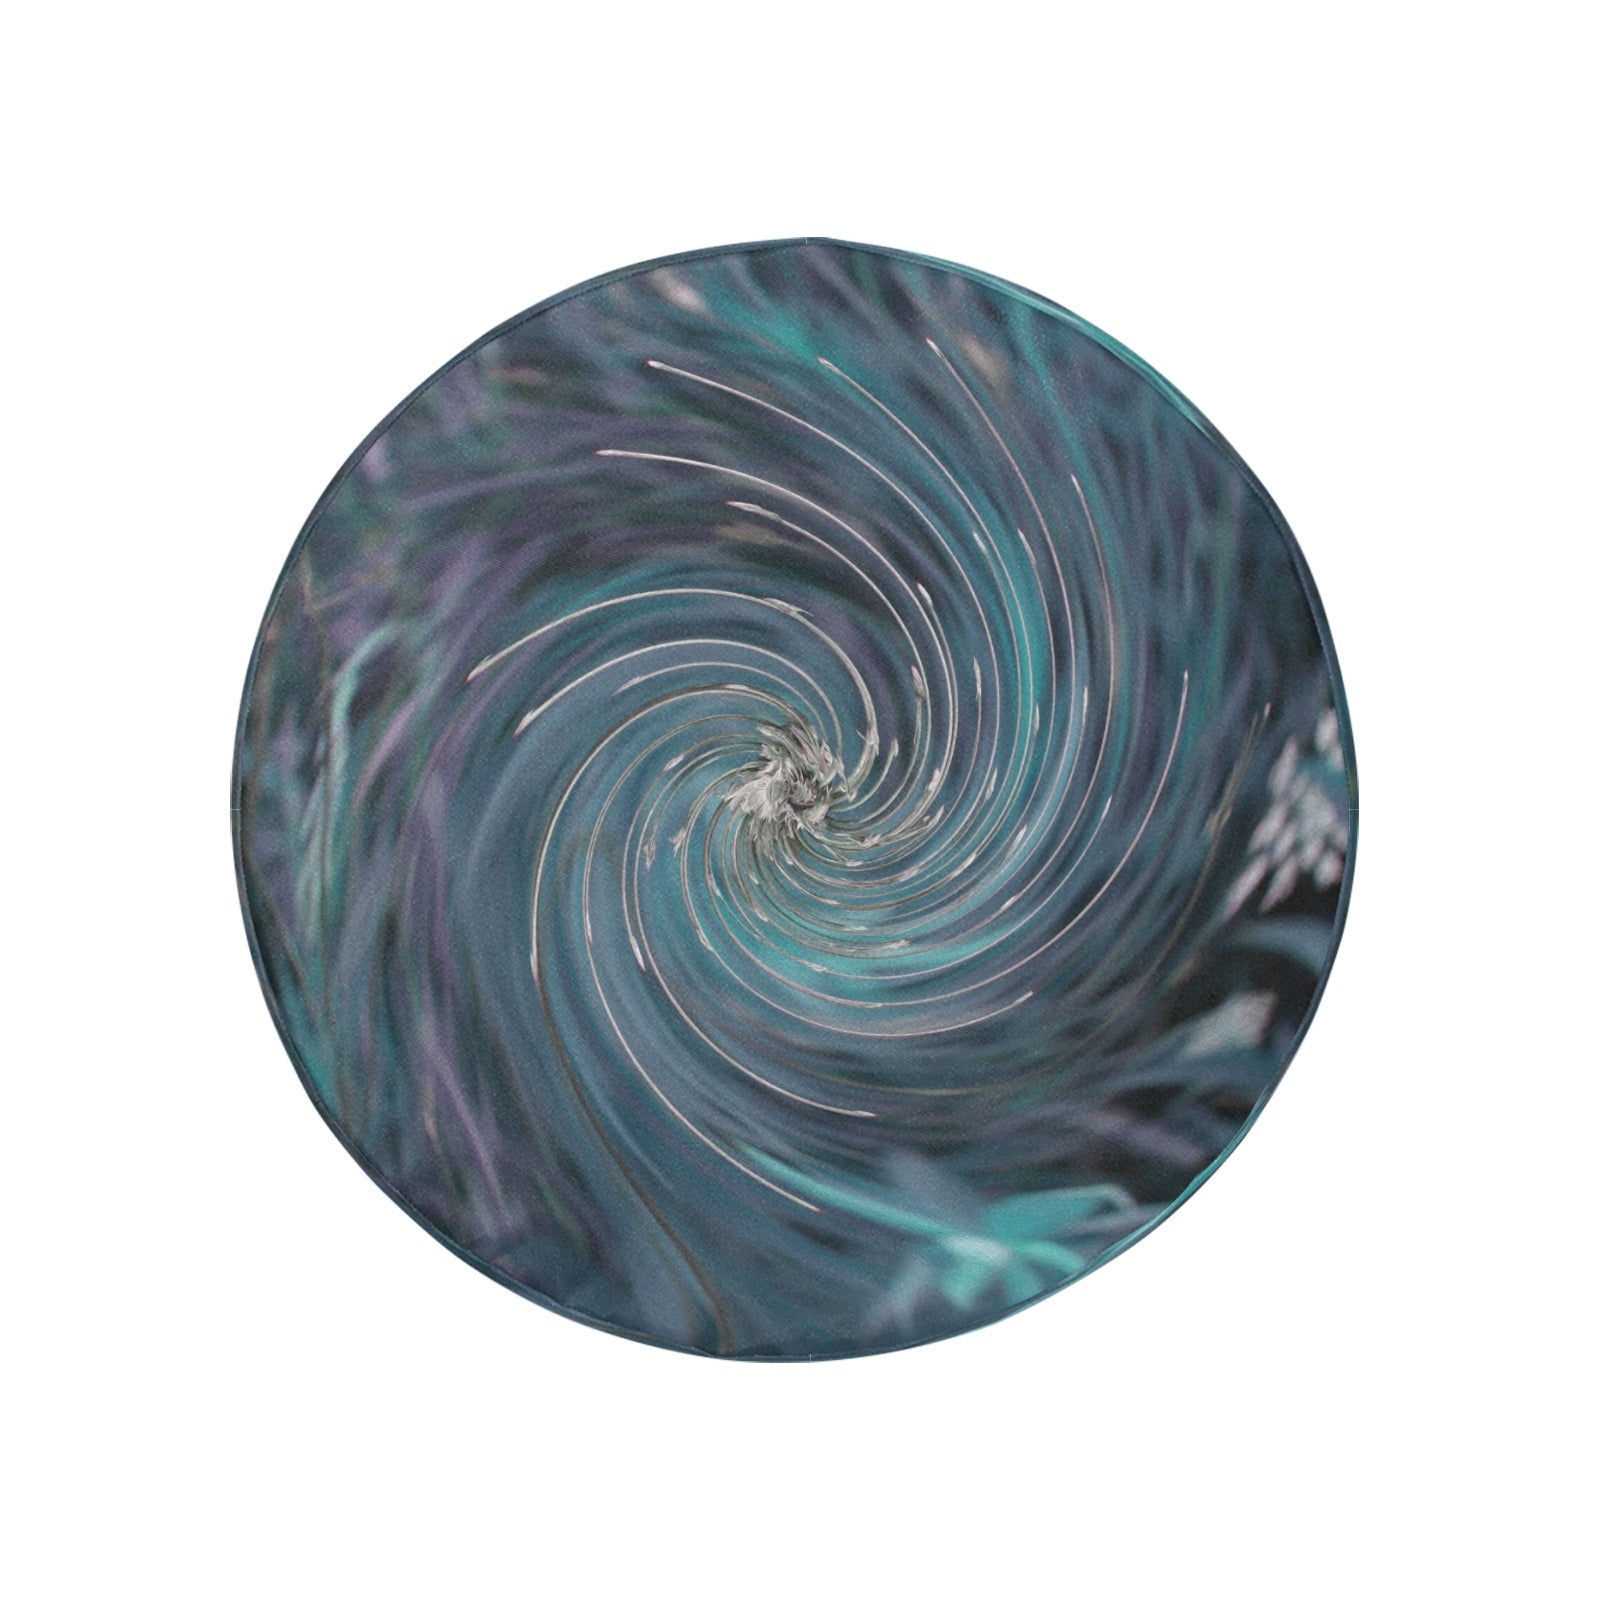 Spare Tire Covers, Cool Abstract Retro Black and Teal Cosmic Swirl - Medium